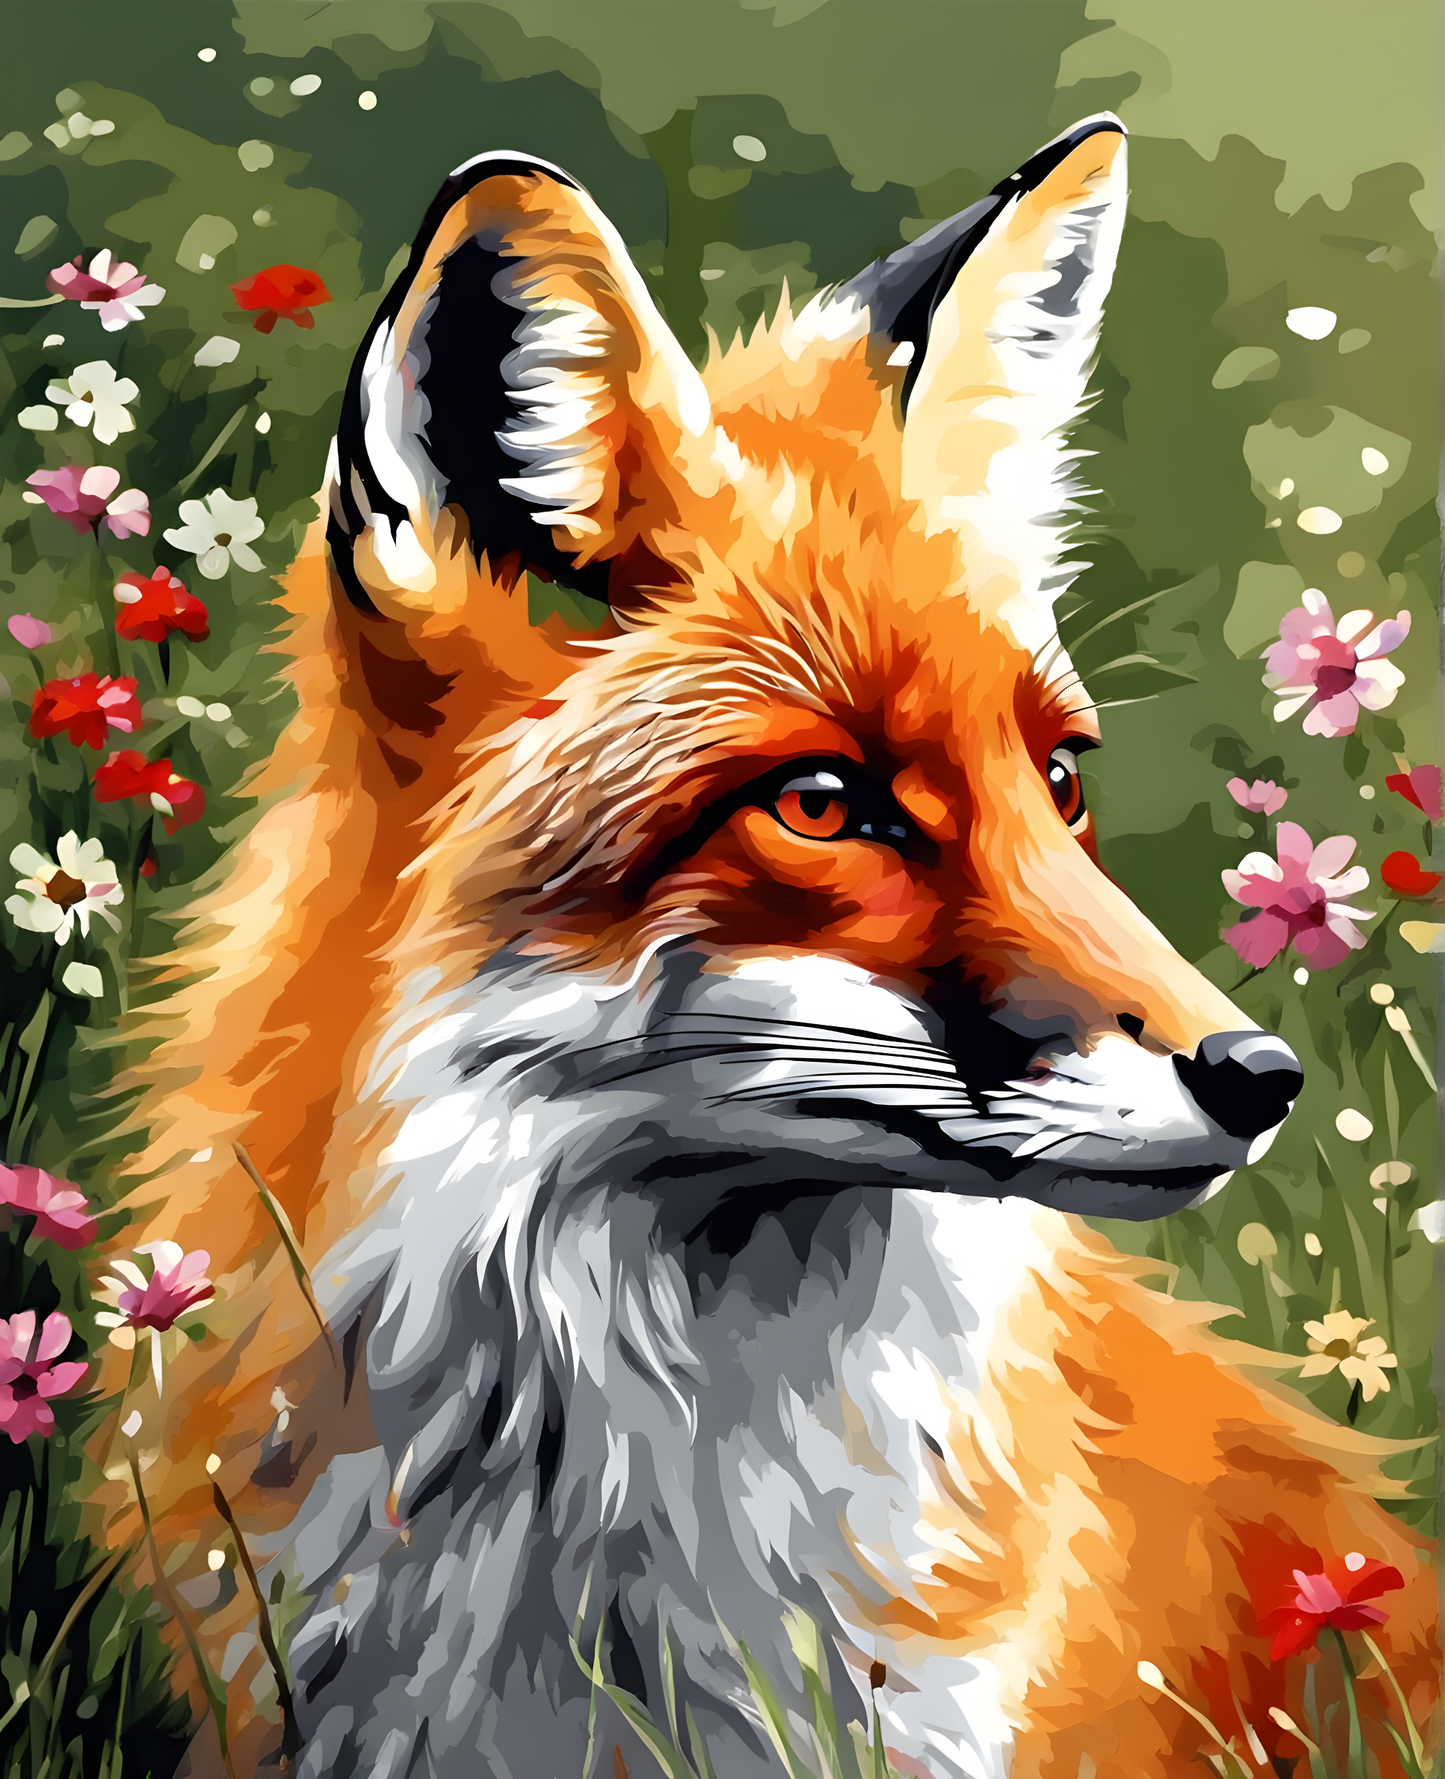 A Beautiful Fox (1) - Van-Go Paint-By-Number Kit